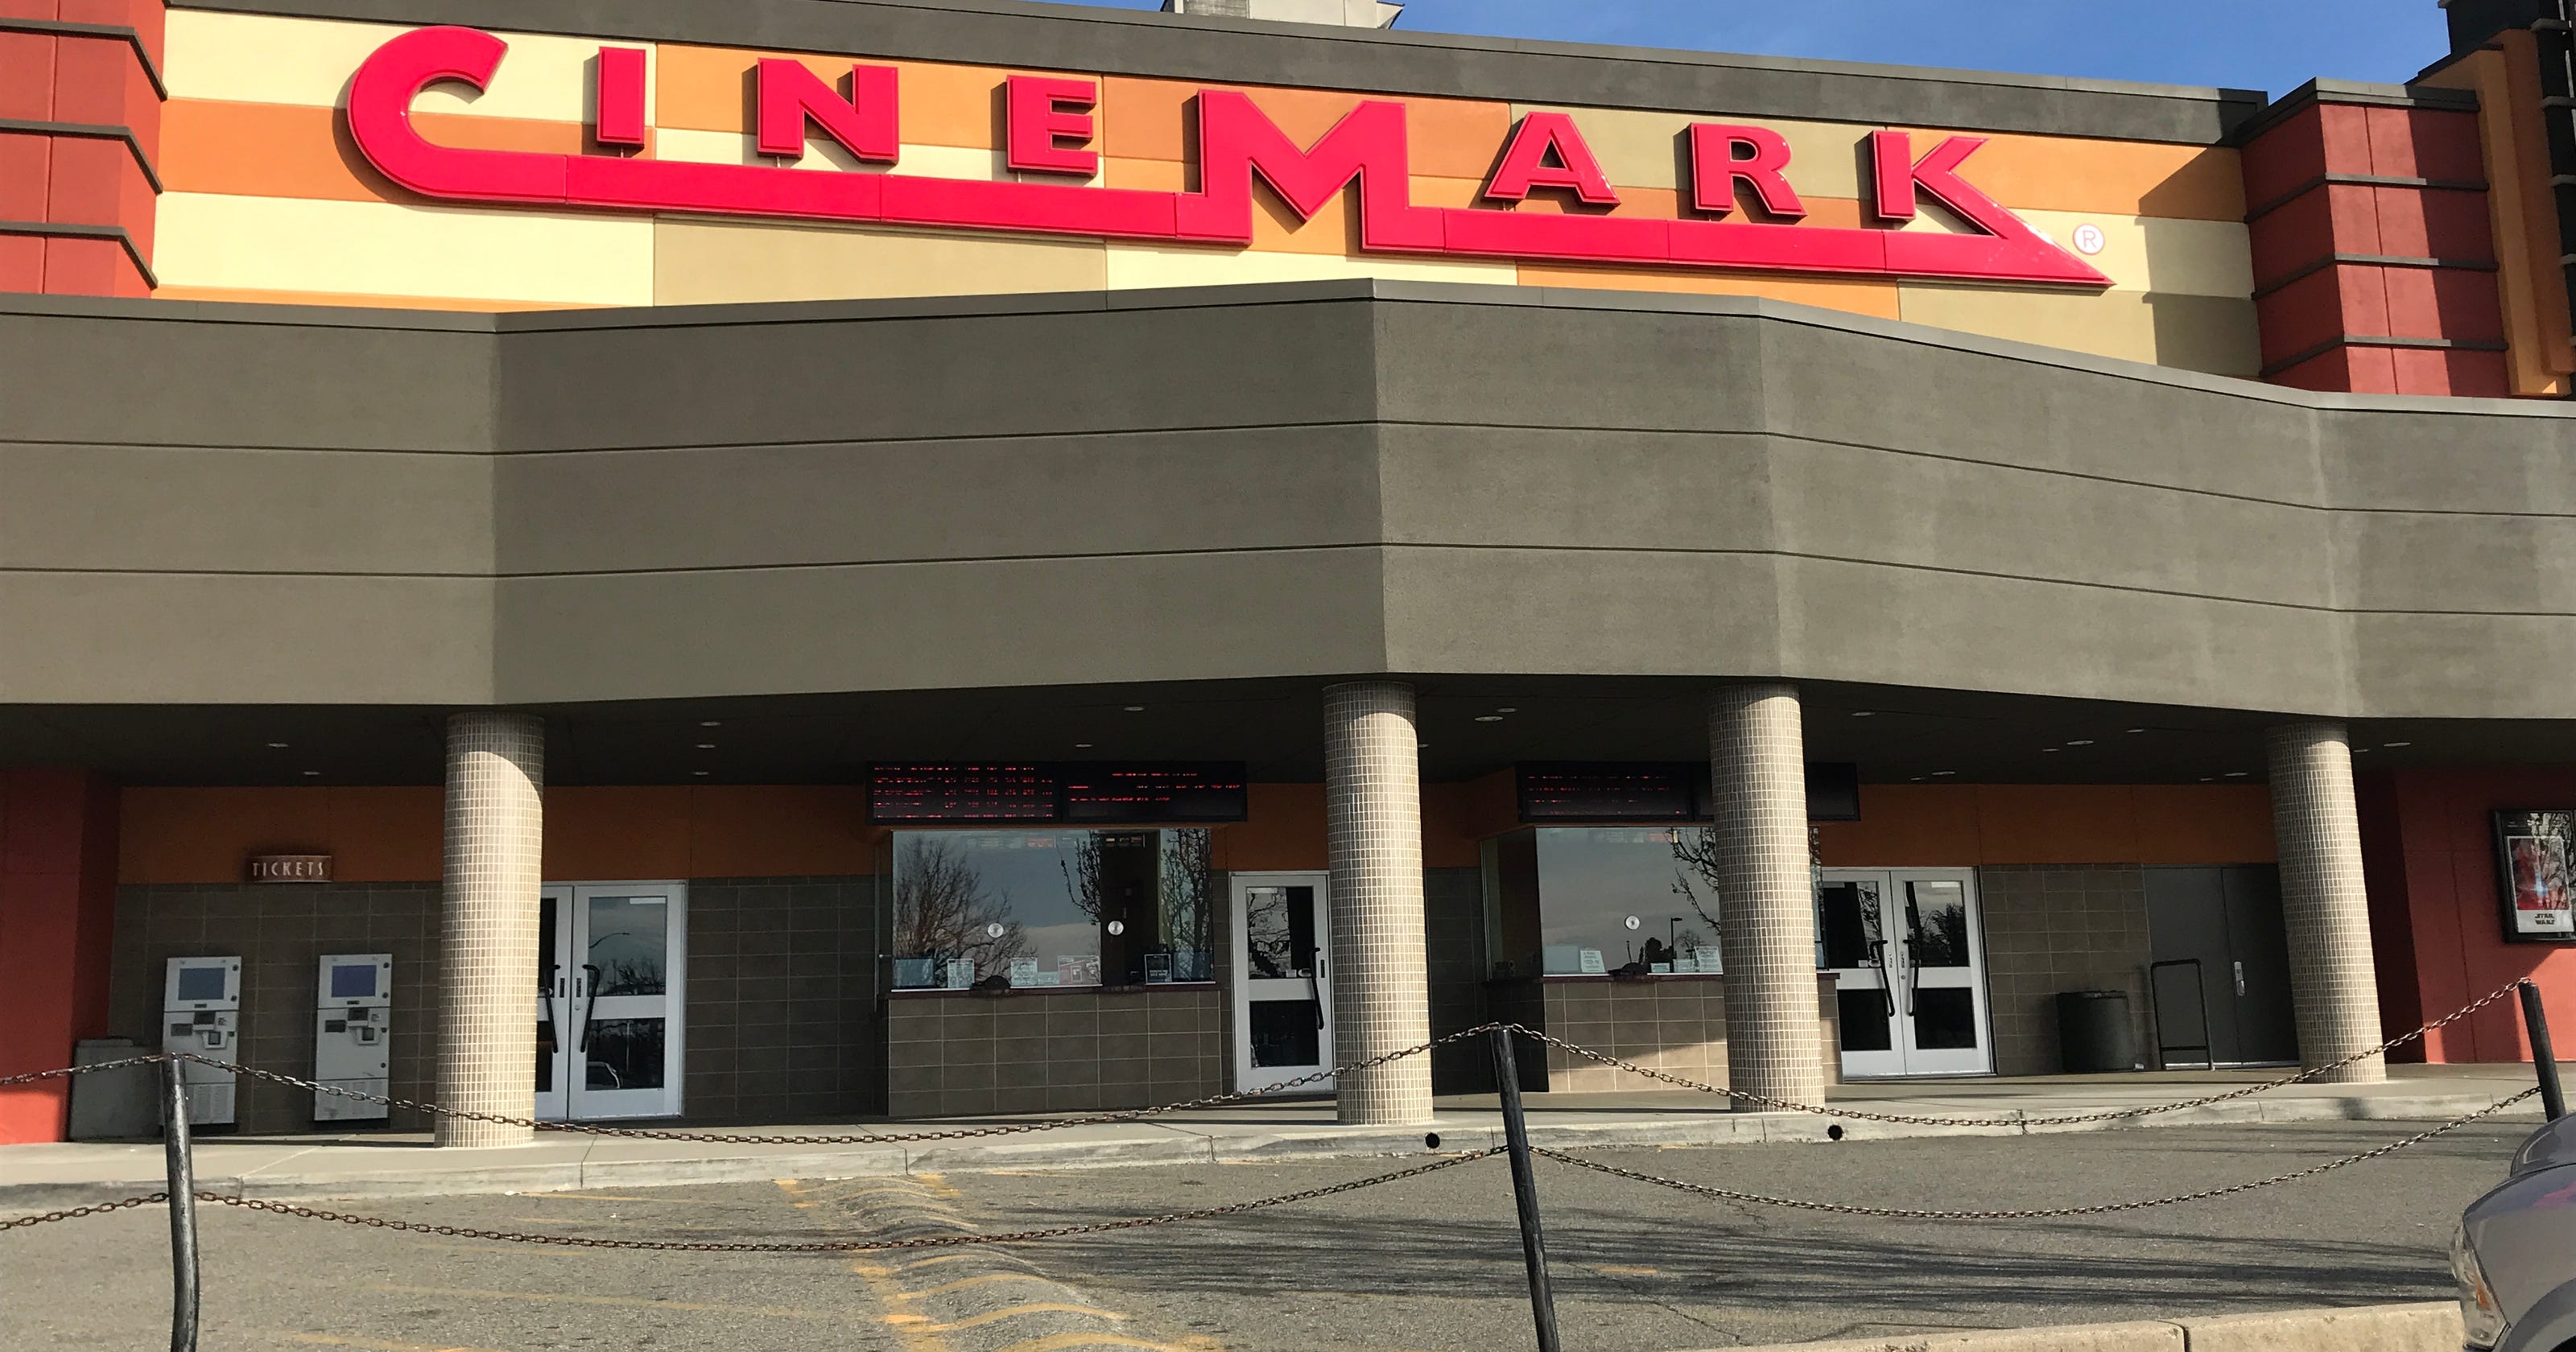 Cinemark 14 in Redding wants to serve alcohol